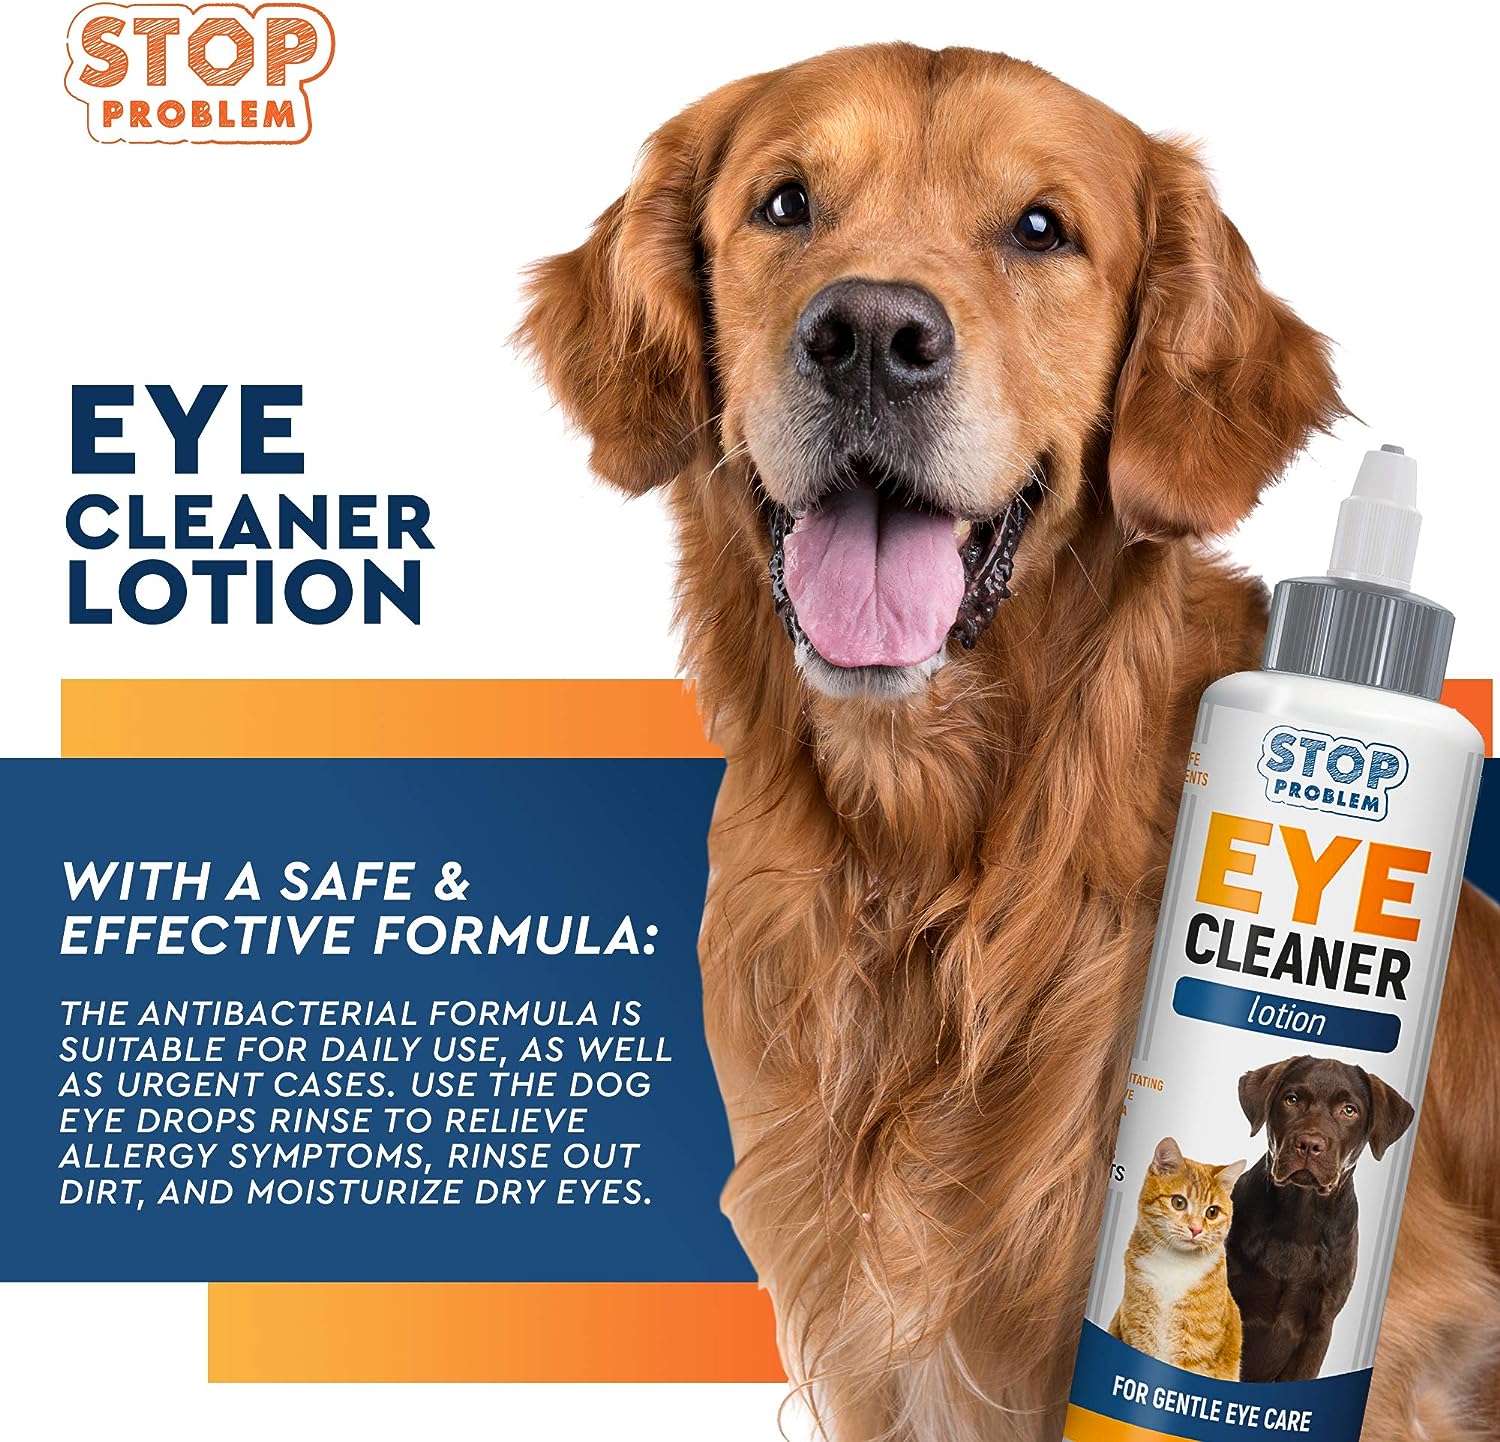 All Pets Eye Wash Drops for Relieve Pink Eye, Allergies Symptoms, Infections & Runny, Dry Eyes - Pain-Free Treatment Helps Prevent Abrasions, Irritations & Conjunctivitis : Pet Supplies